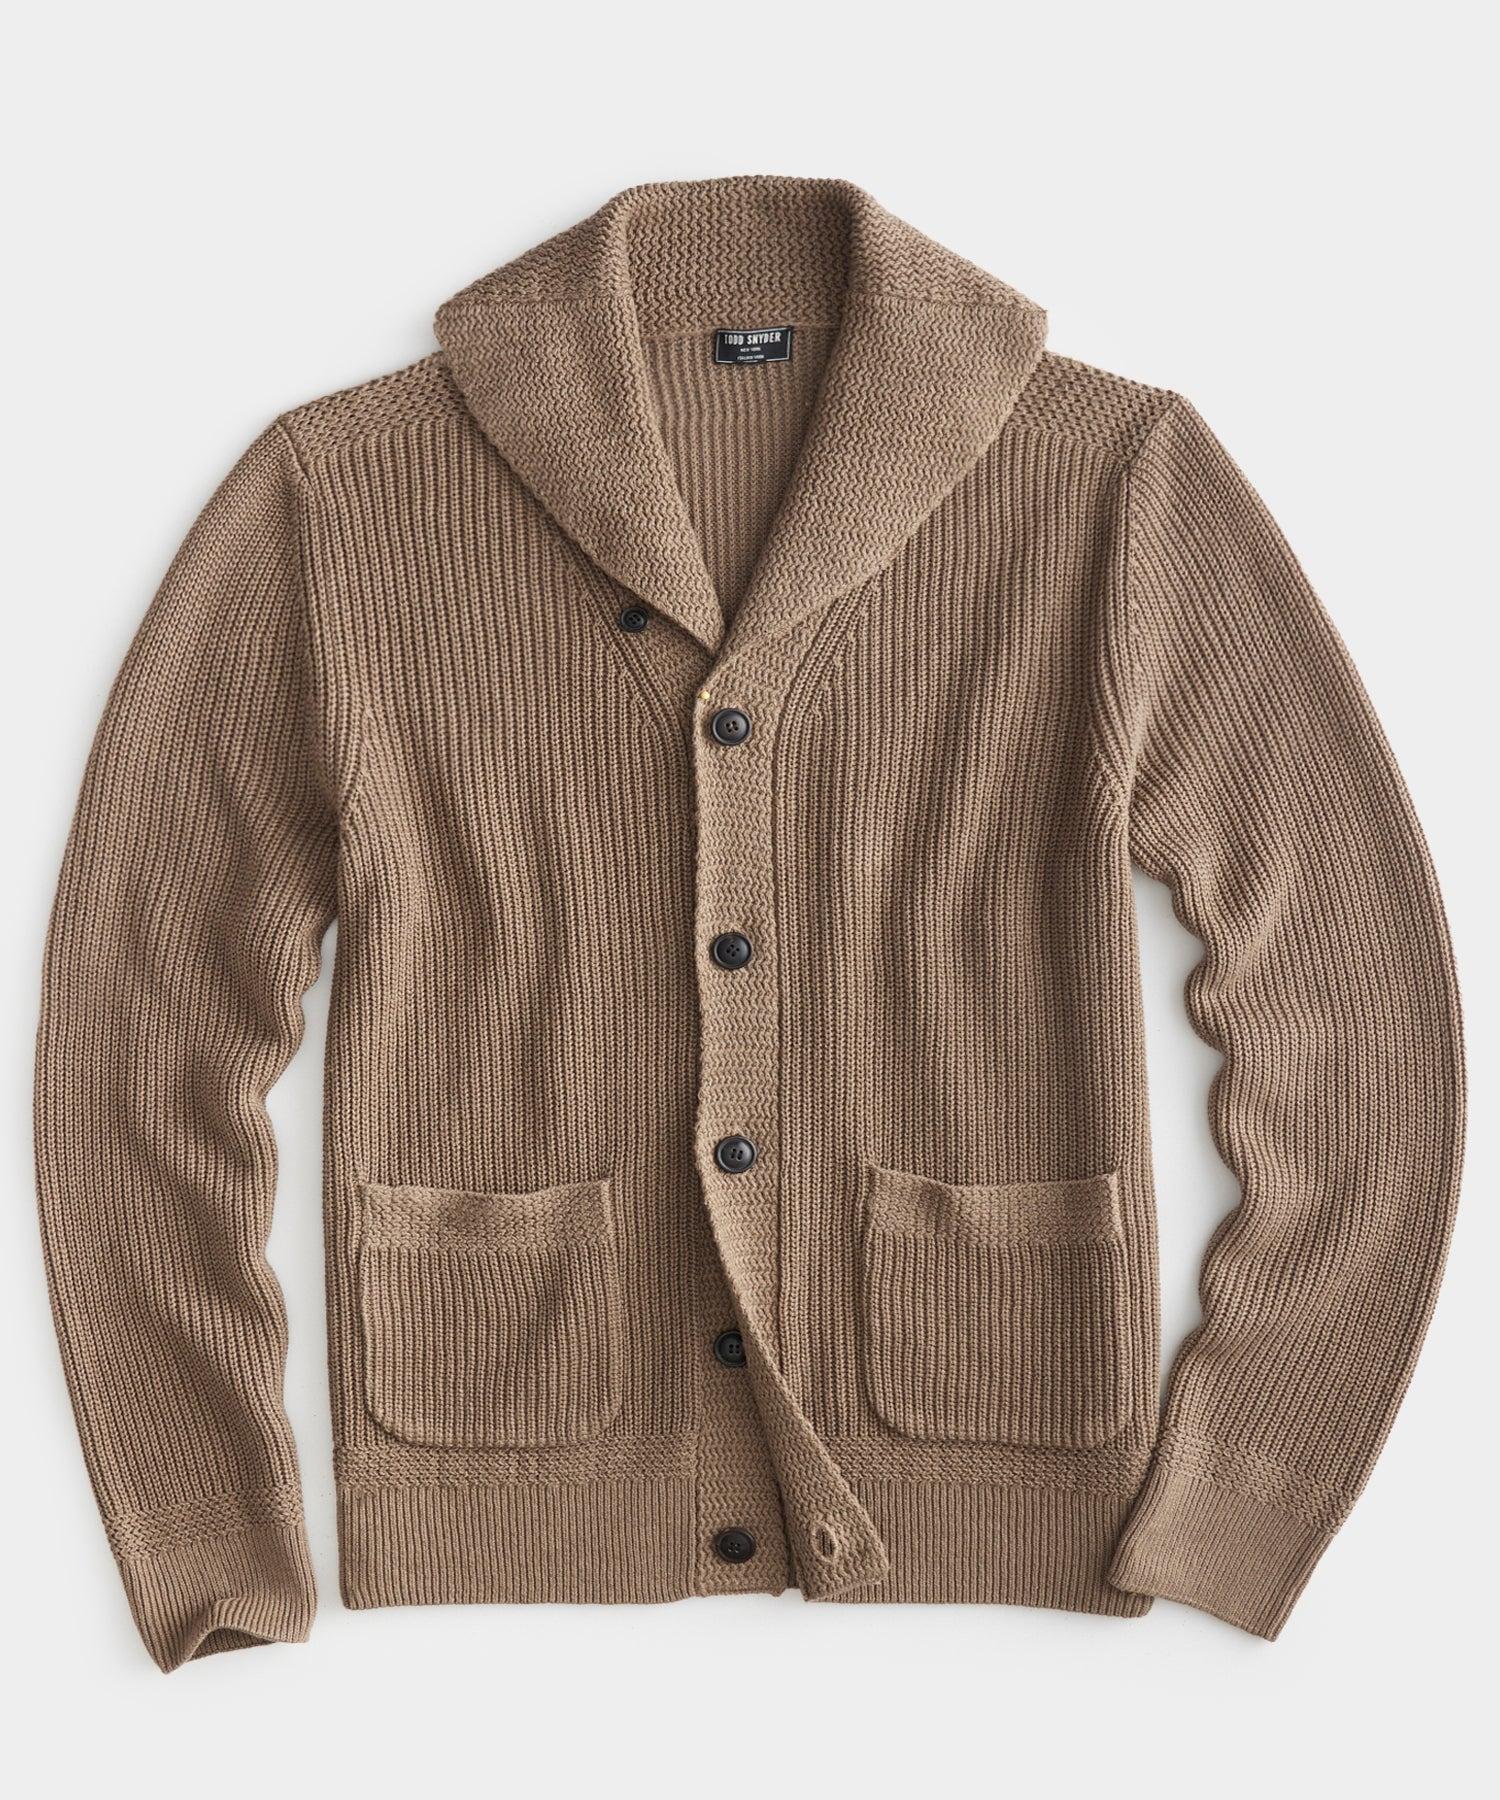 Todd Snyder Cotton Linen Shawl Cardigan in Brown for Men | Lyst